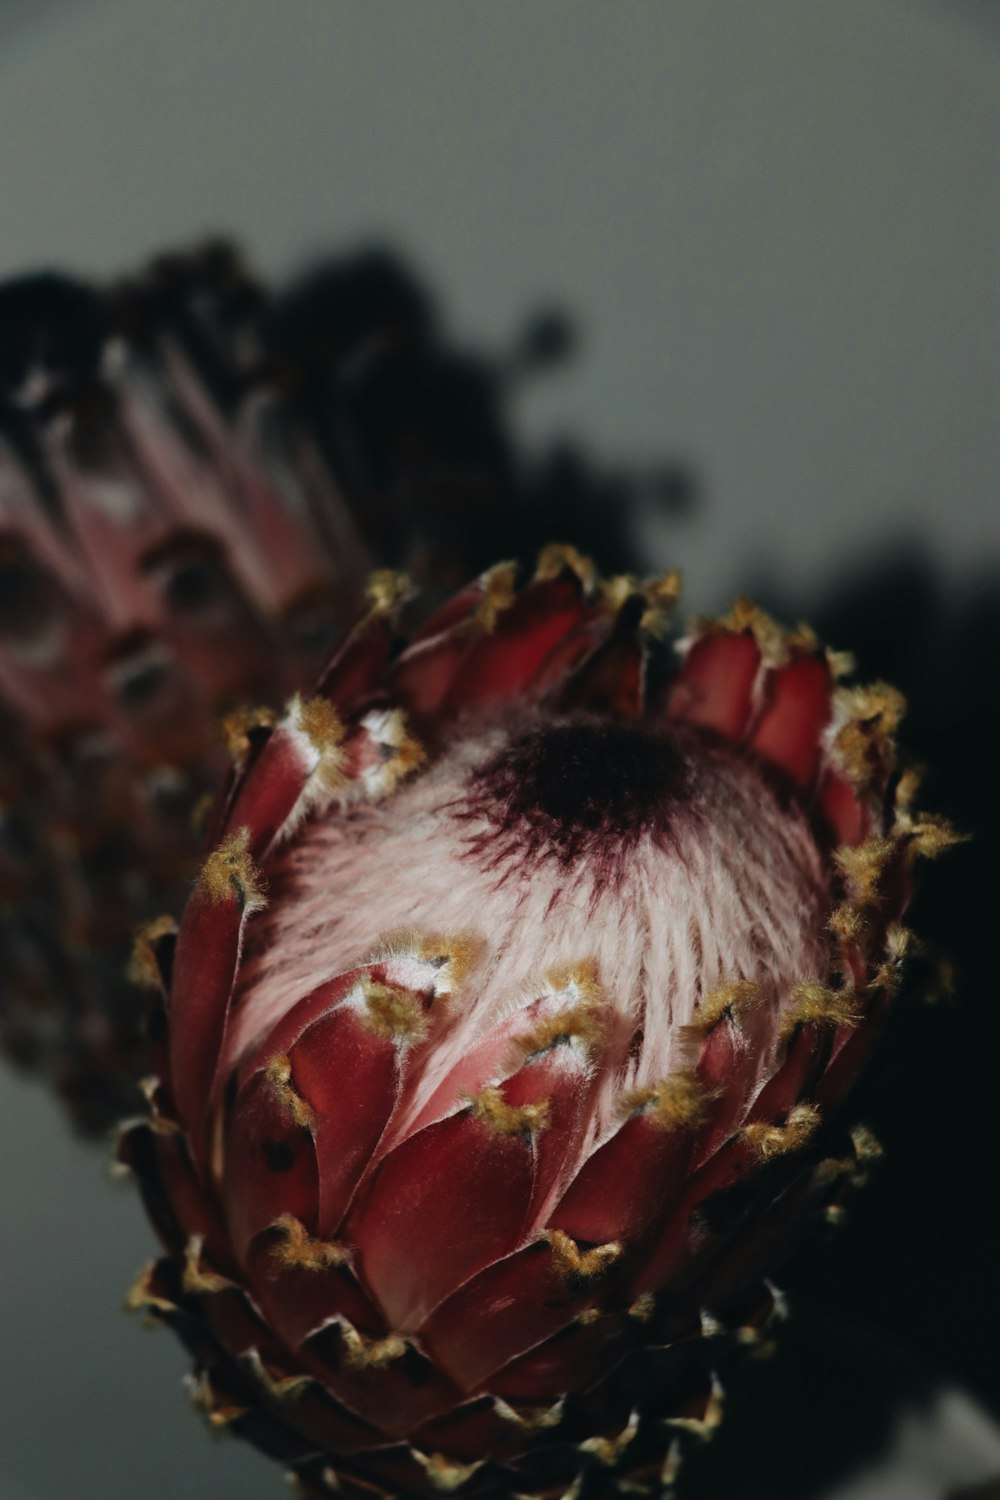 a close up of an artichoke flower on a table